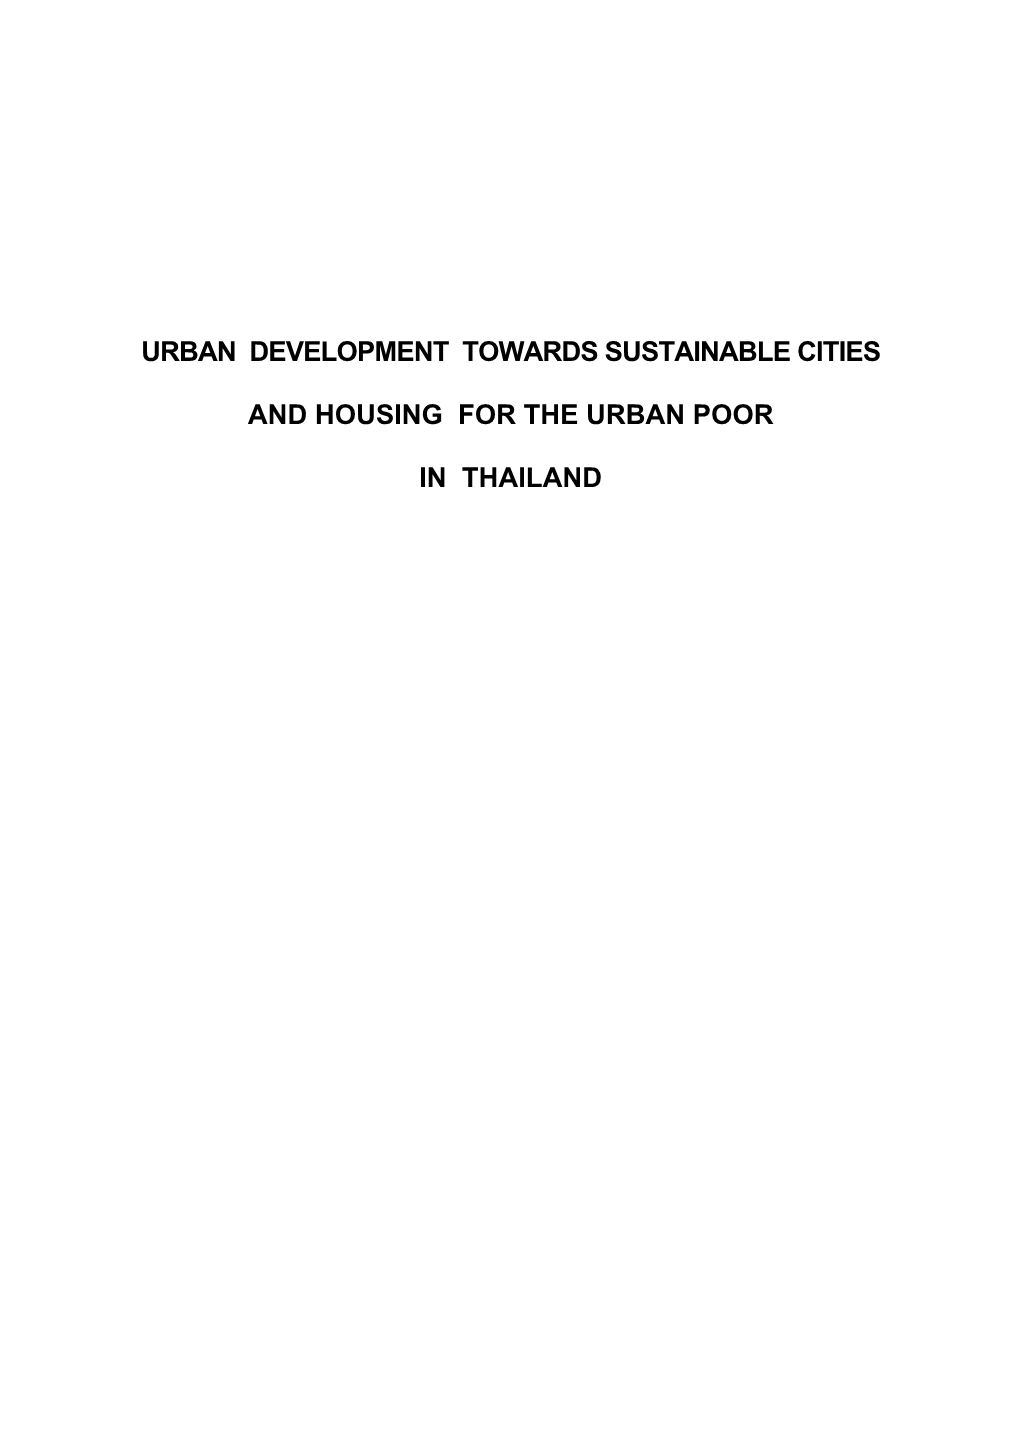 Urban Development Towards Sustainable Cities and Housing for the Urban Poor in Thailand